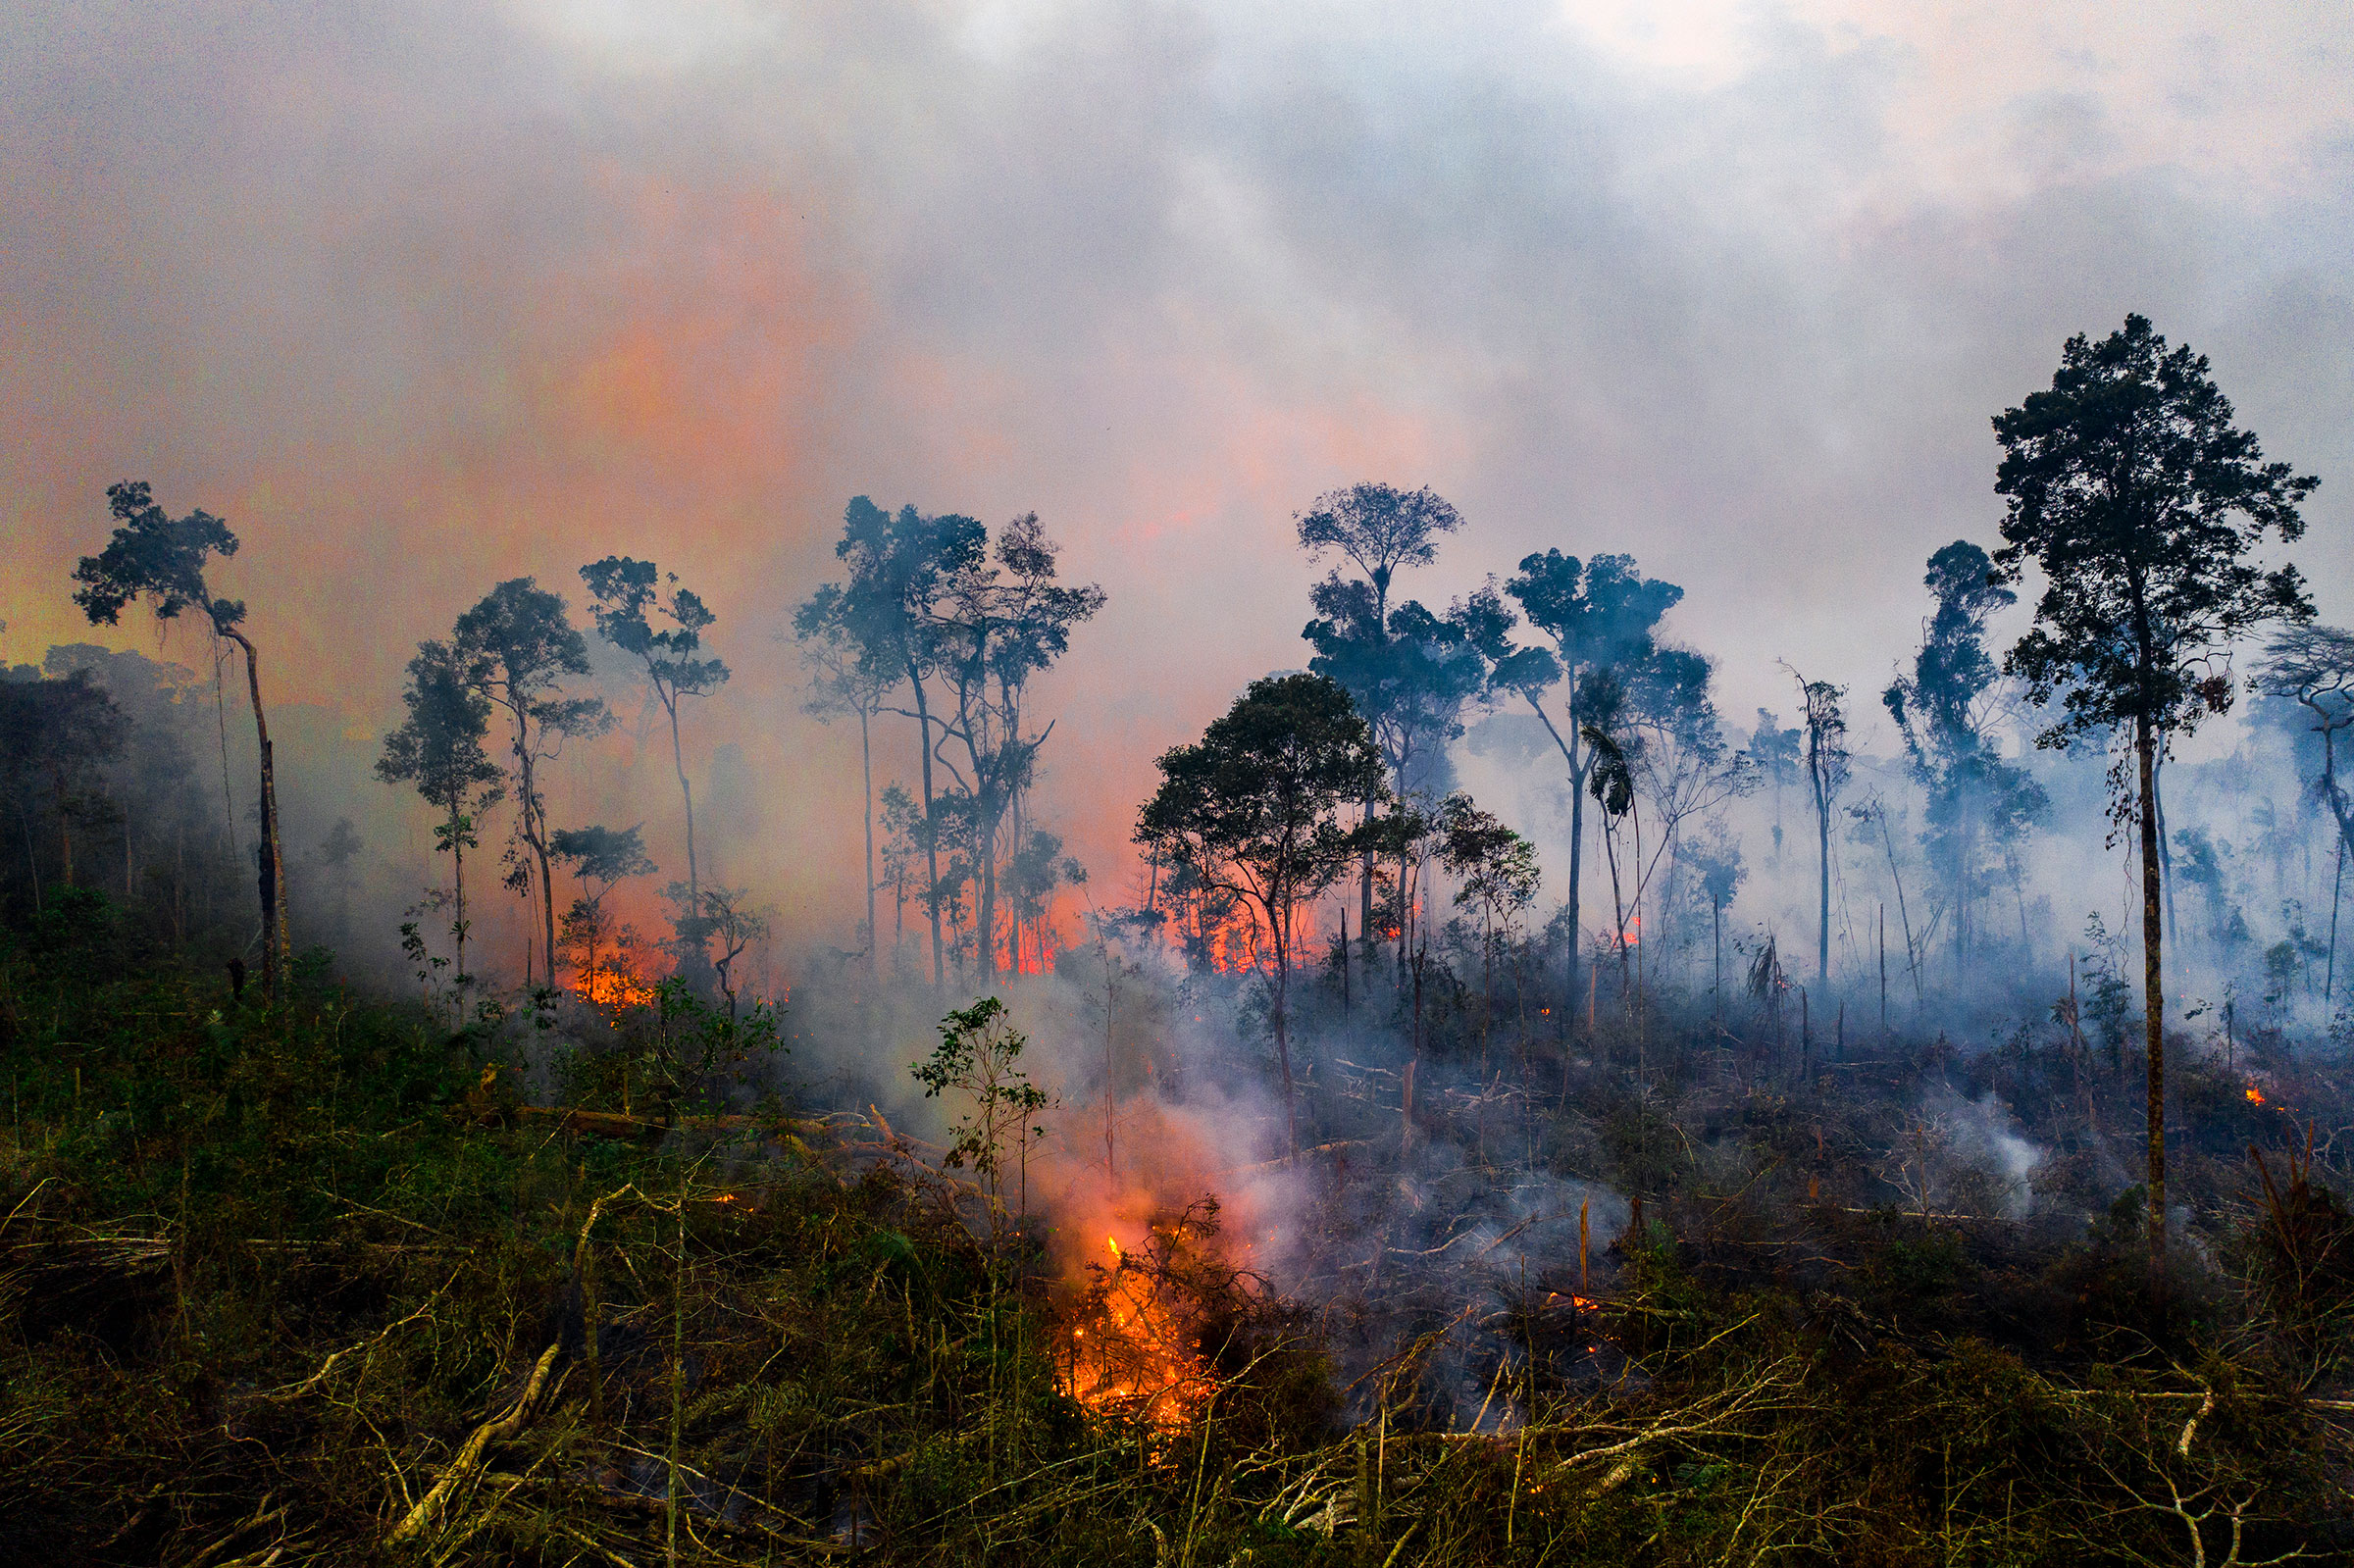 A fire near the Jacundá National Forest in Brazil’s Amazon in August (Sebastian Liste—NOOR for TIME)